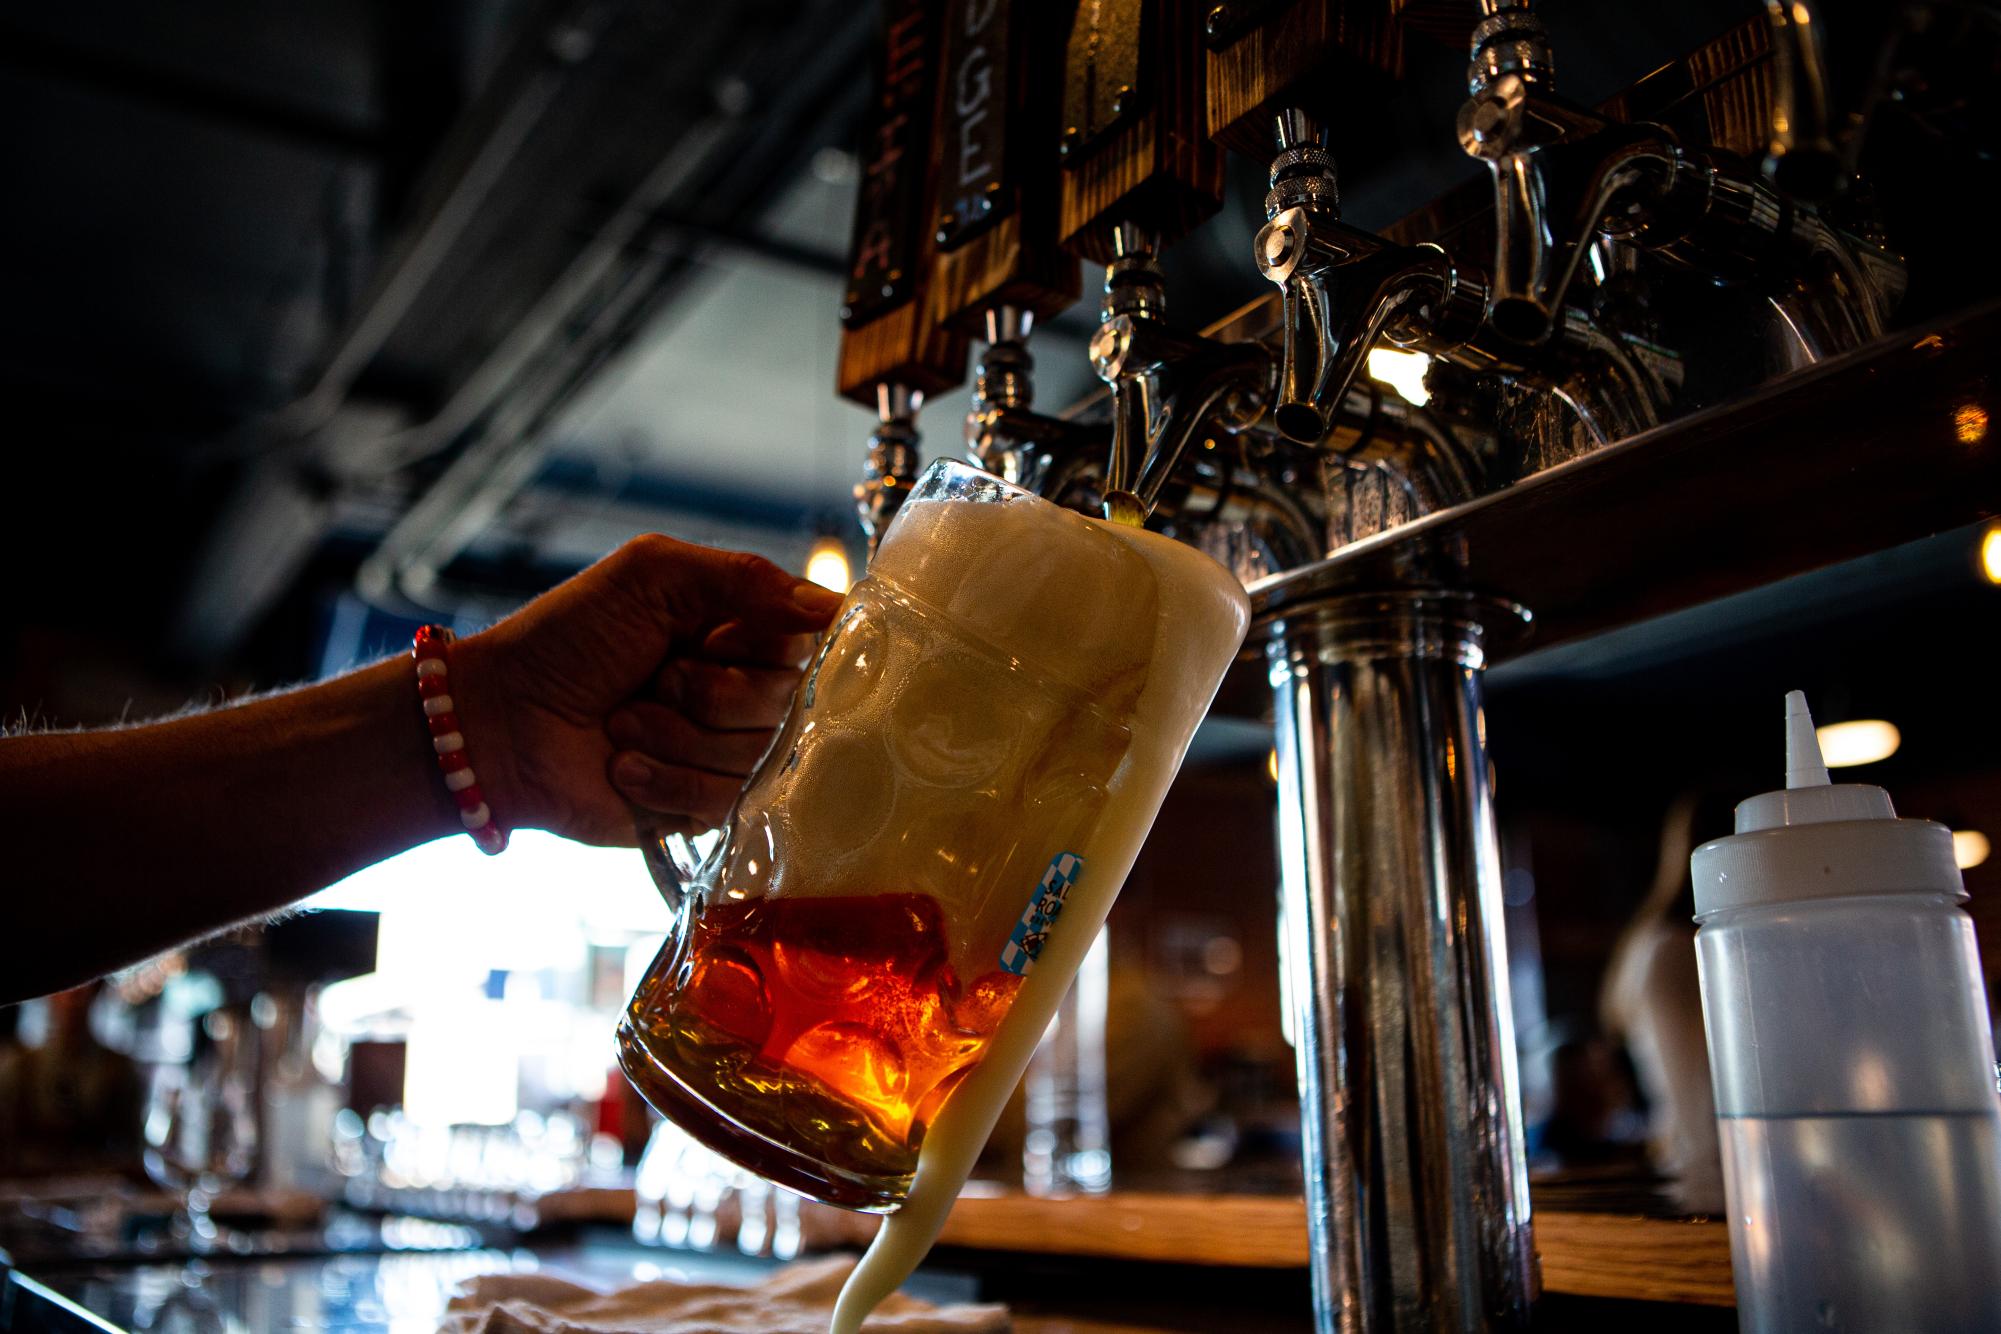 A beer being poured at Salt Road Brewing during their Oktoberfest event Sept. 23. The brewery is located at 321 Old Firehouse Alley and opened in April 2023.